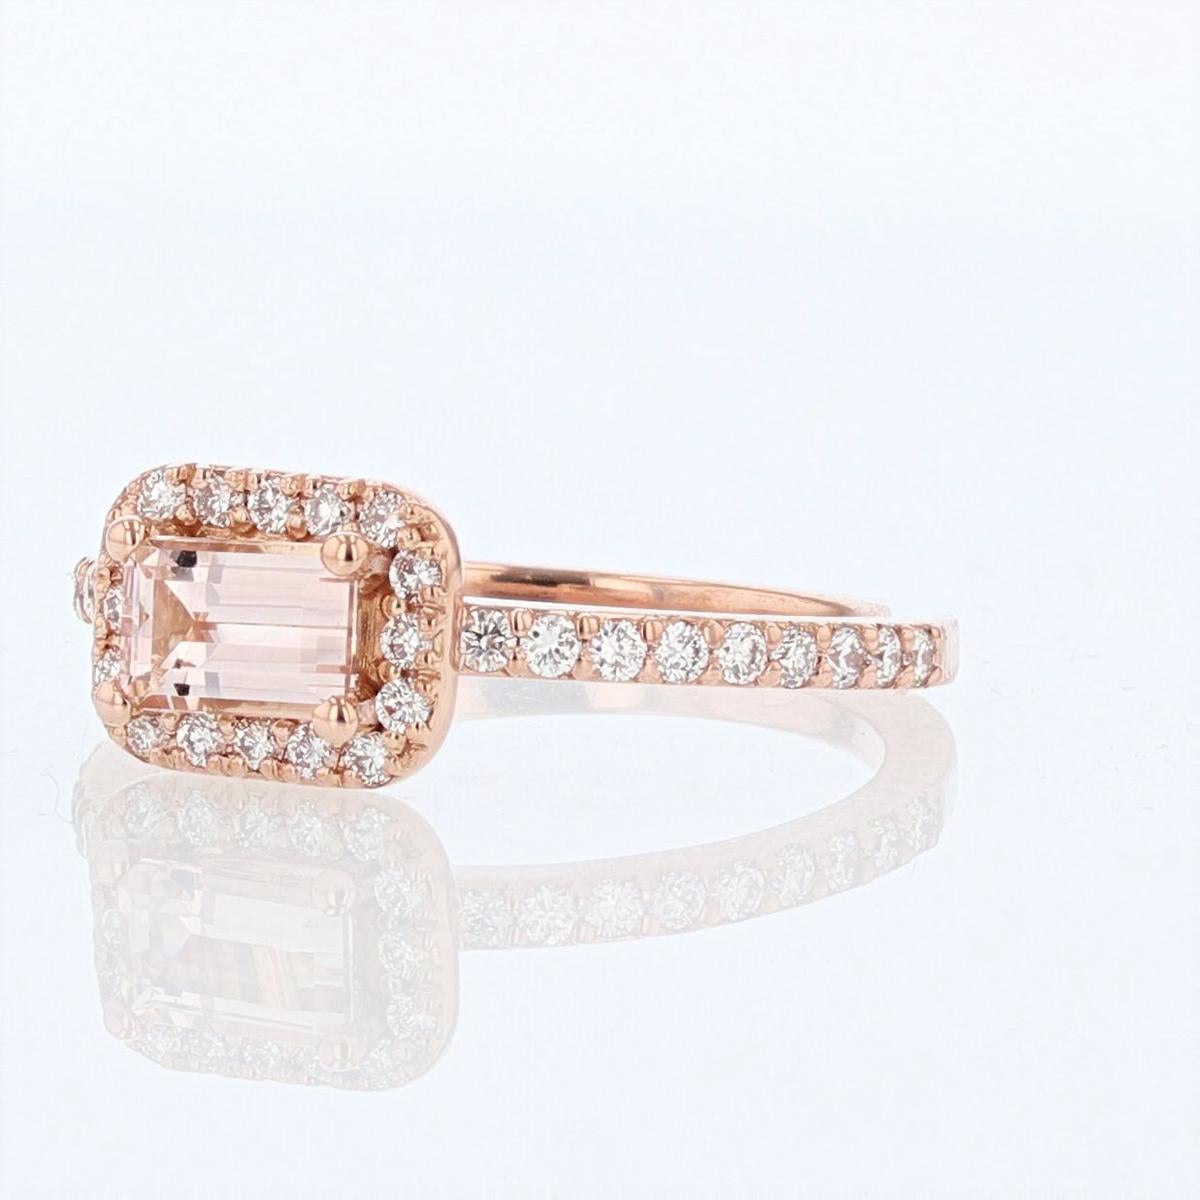 This ring is designed by Nazarelle and made in 14k rose gold. The center stone is an emerald cut Morganite set horizontally, weighing 0.54ct and is prong set. The mounting features 0.33ct of round diamonds.